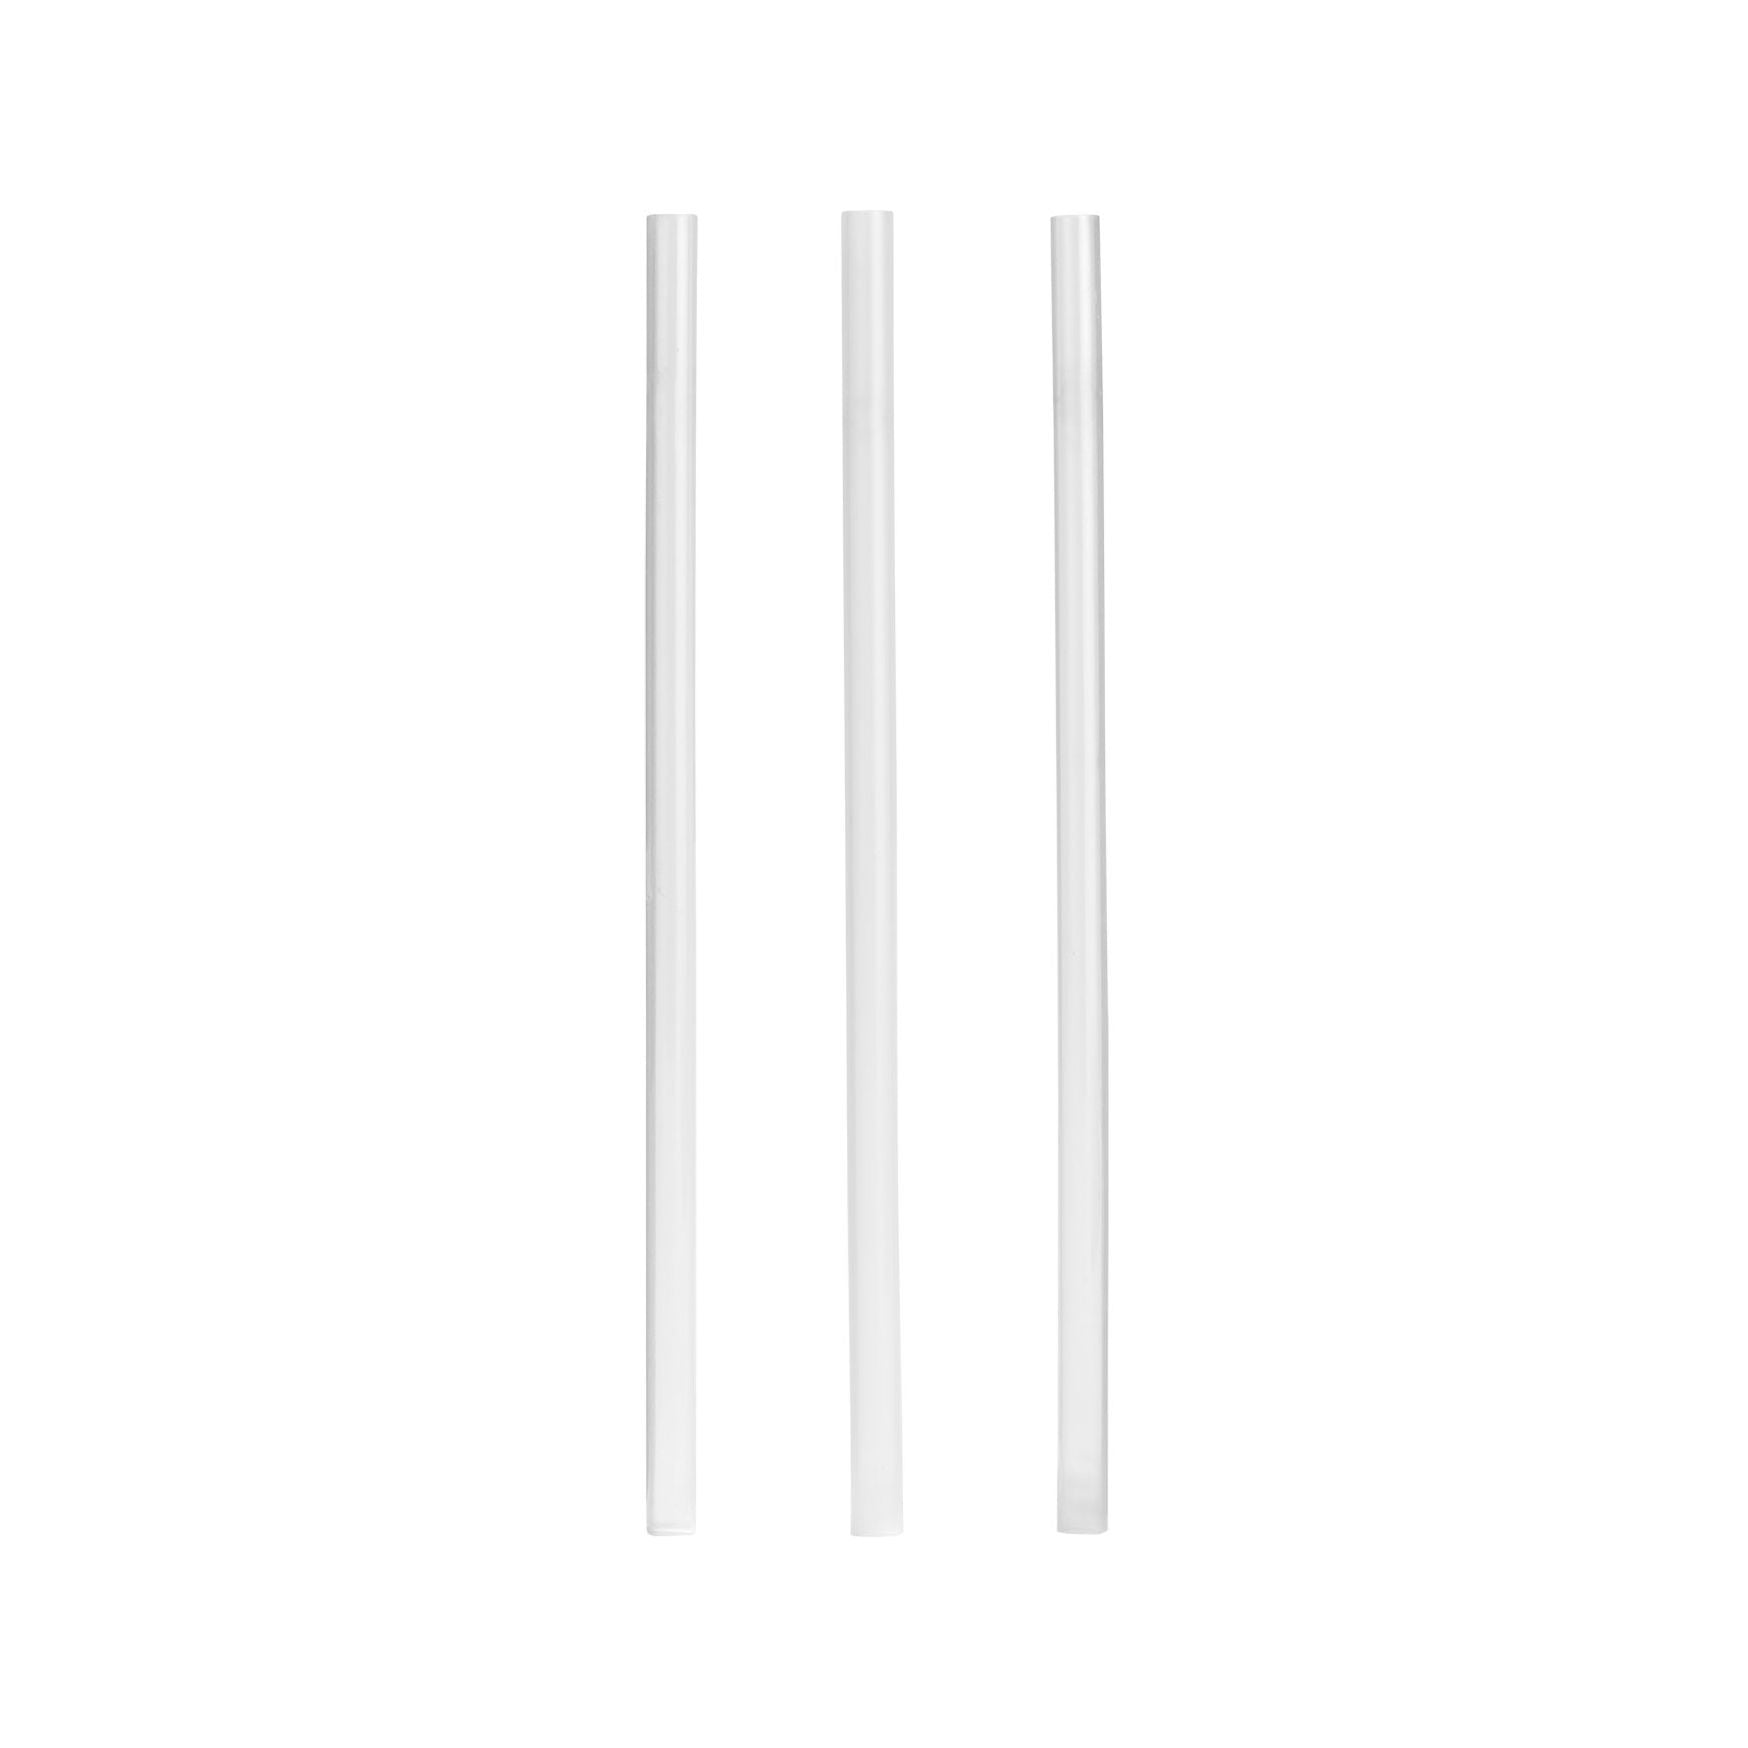 3 PACK REPLACEMENT STRAWS CLEAR